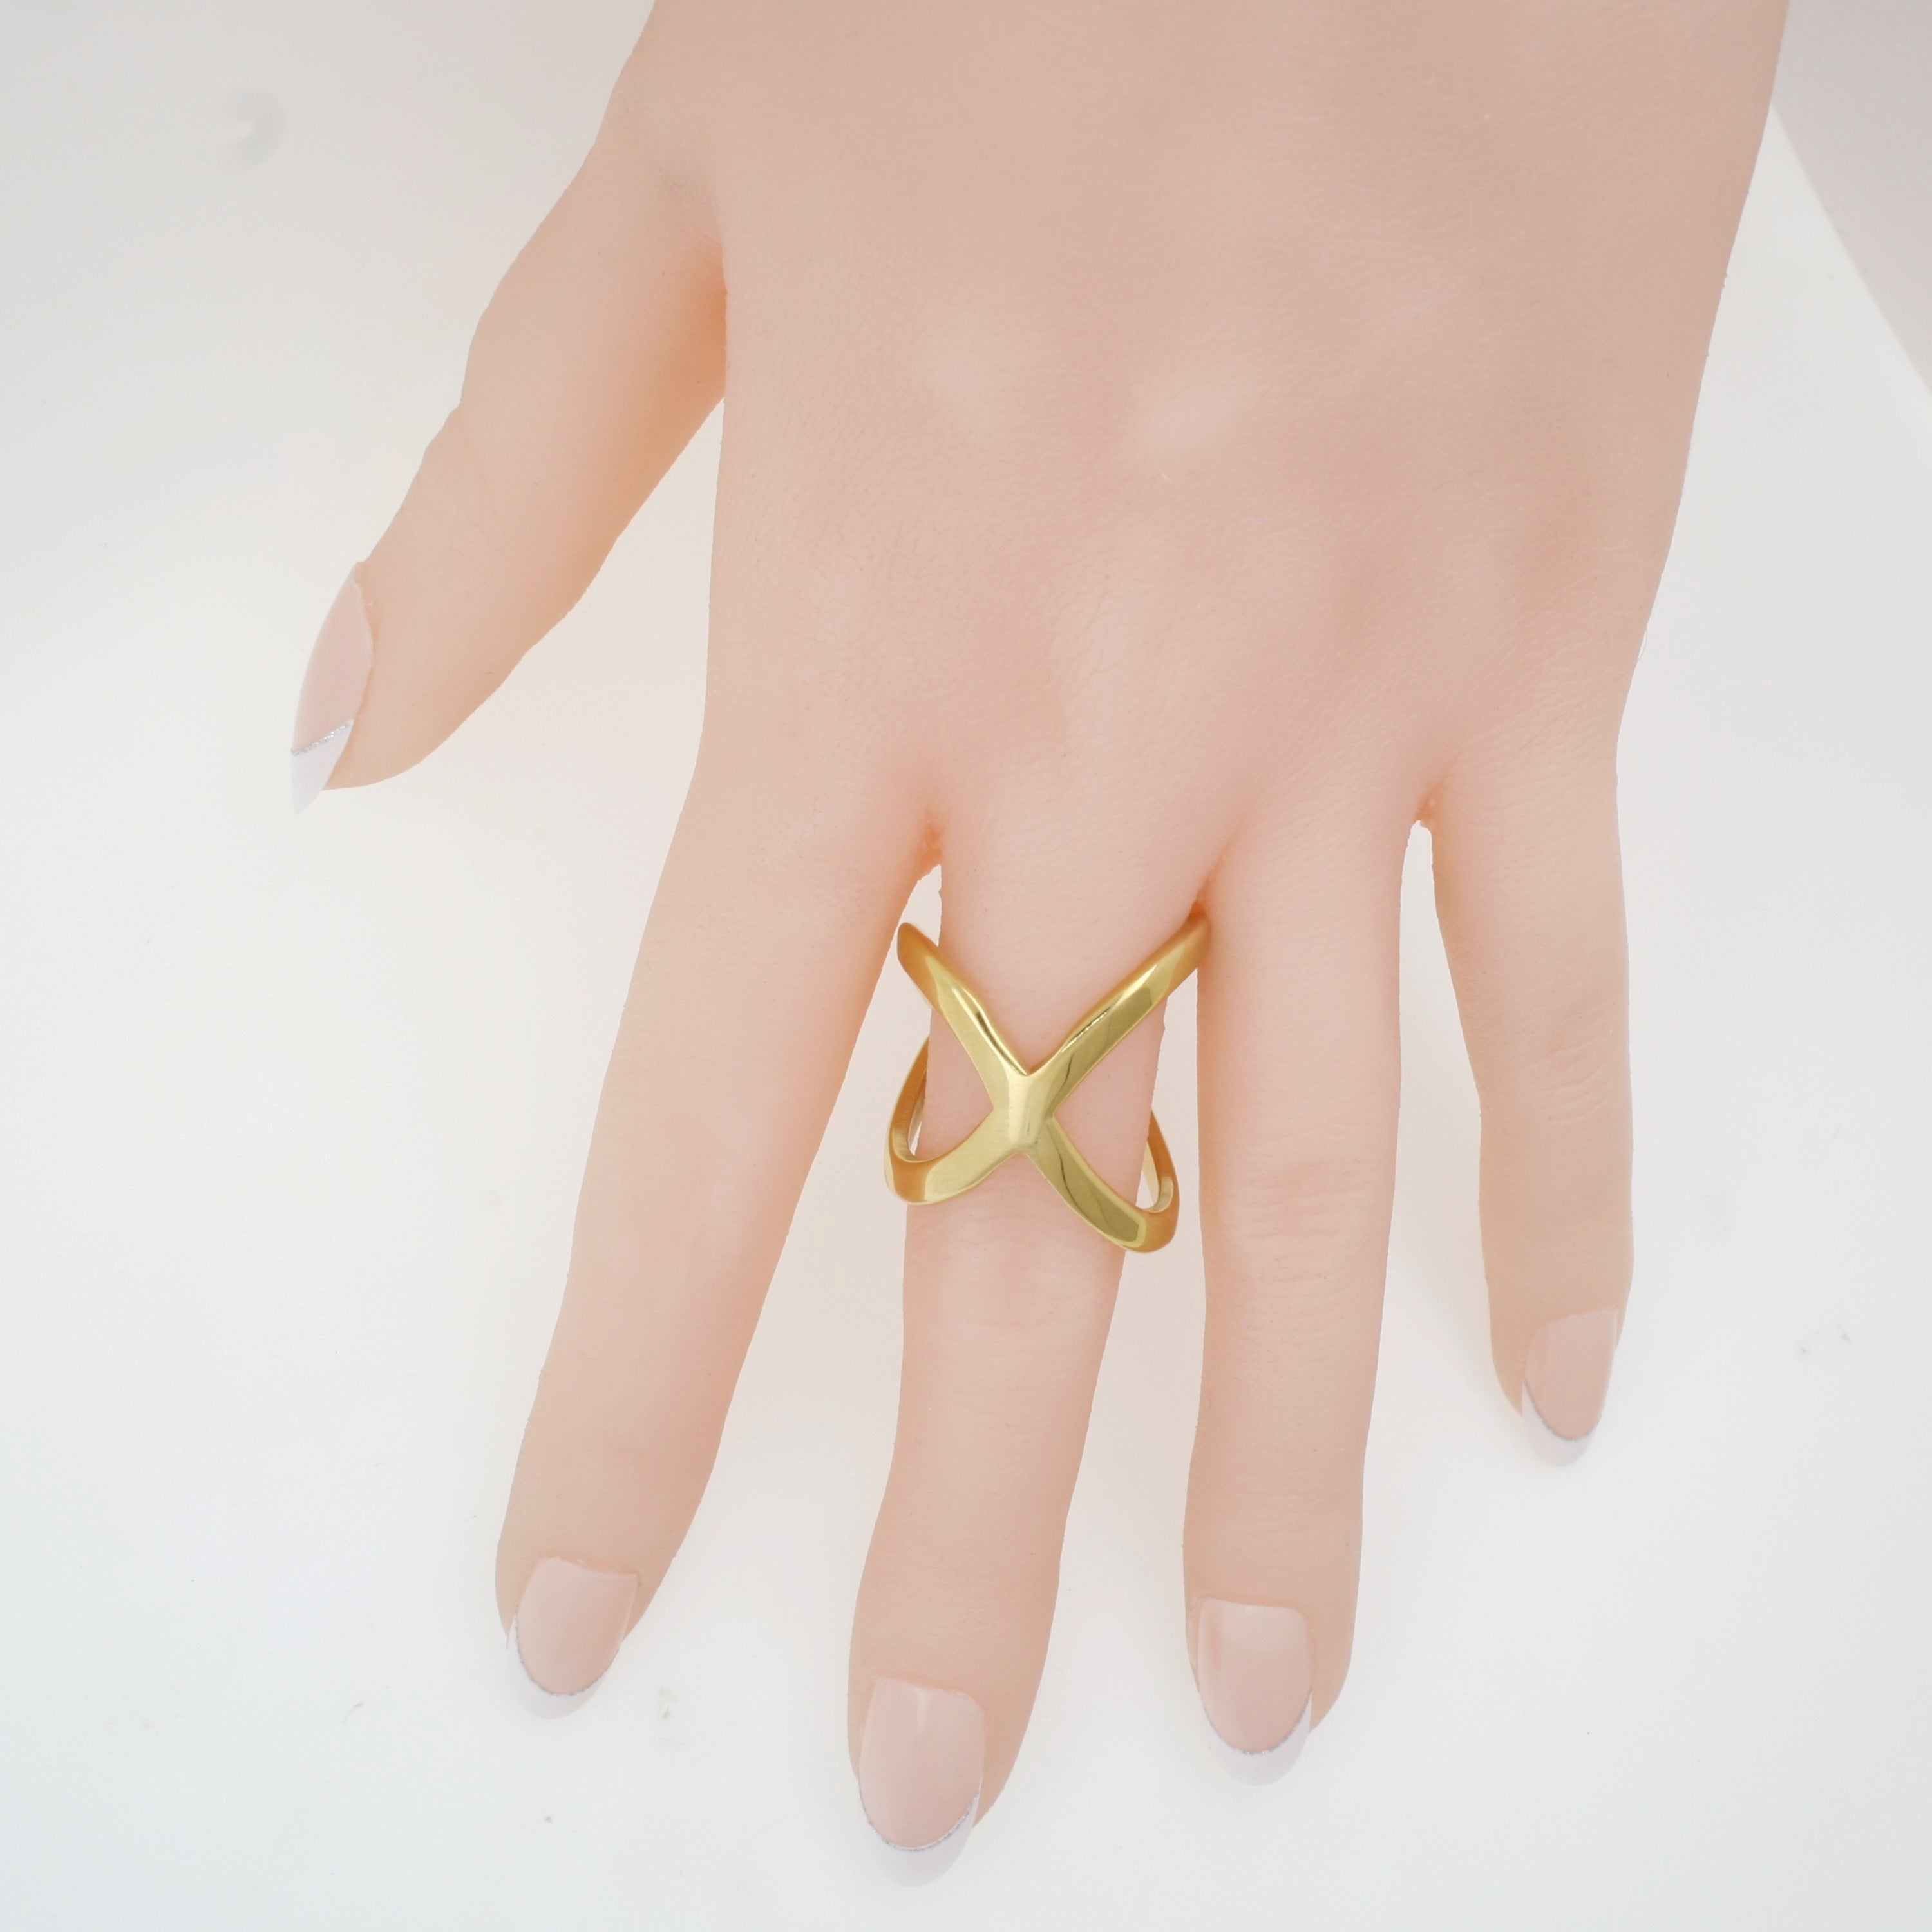 Stainless Steel Gold Tone Modern Geometric Ring